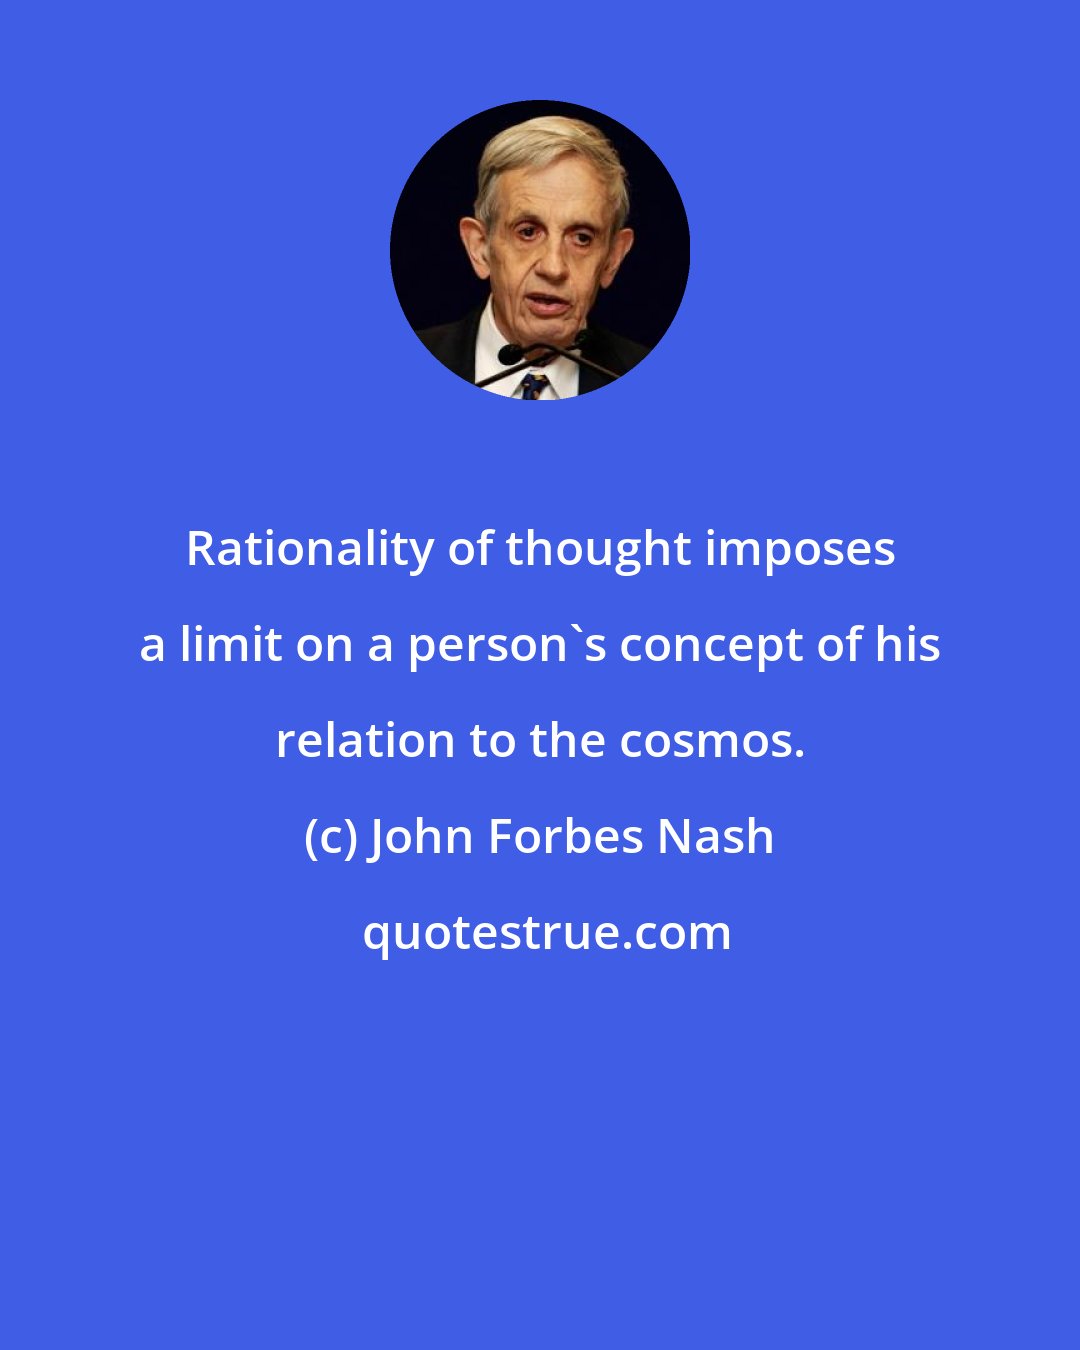 John Forbes Nash: Rationality of thought imposes a limit on a person's concept of his relation to the cosmos.